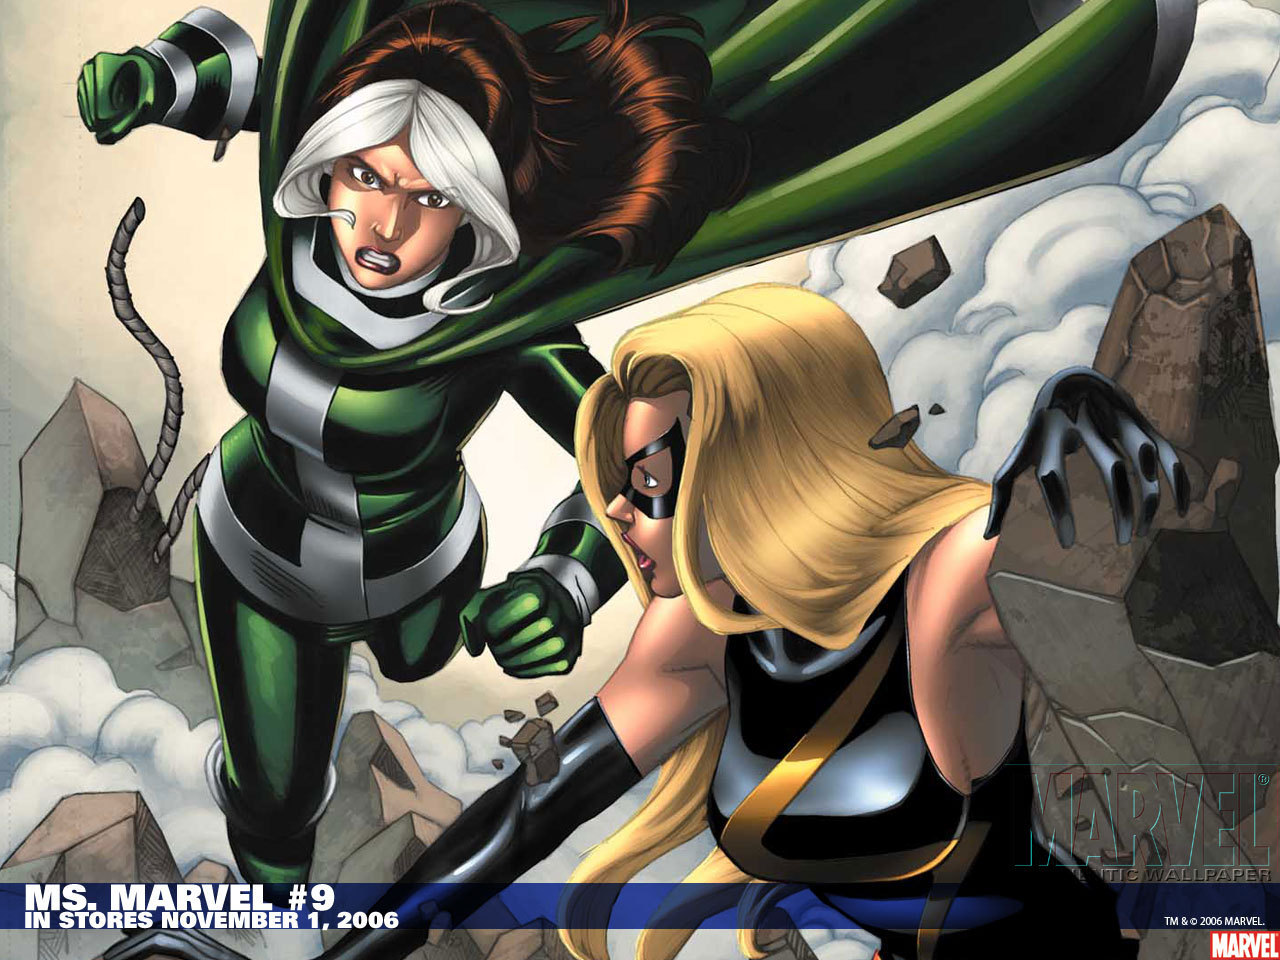 Rogue and Ms marvel x men 24854738 1280 960jpg